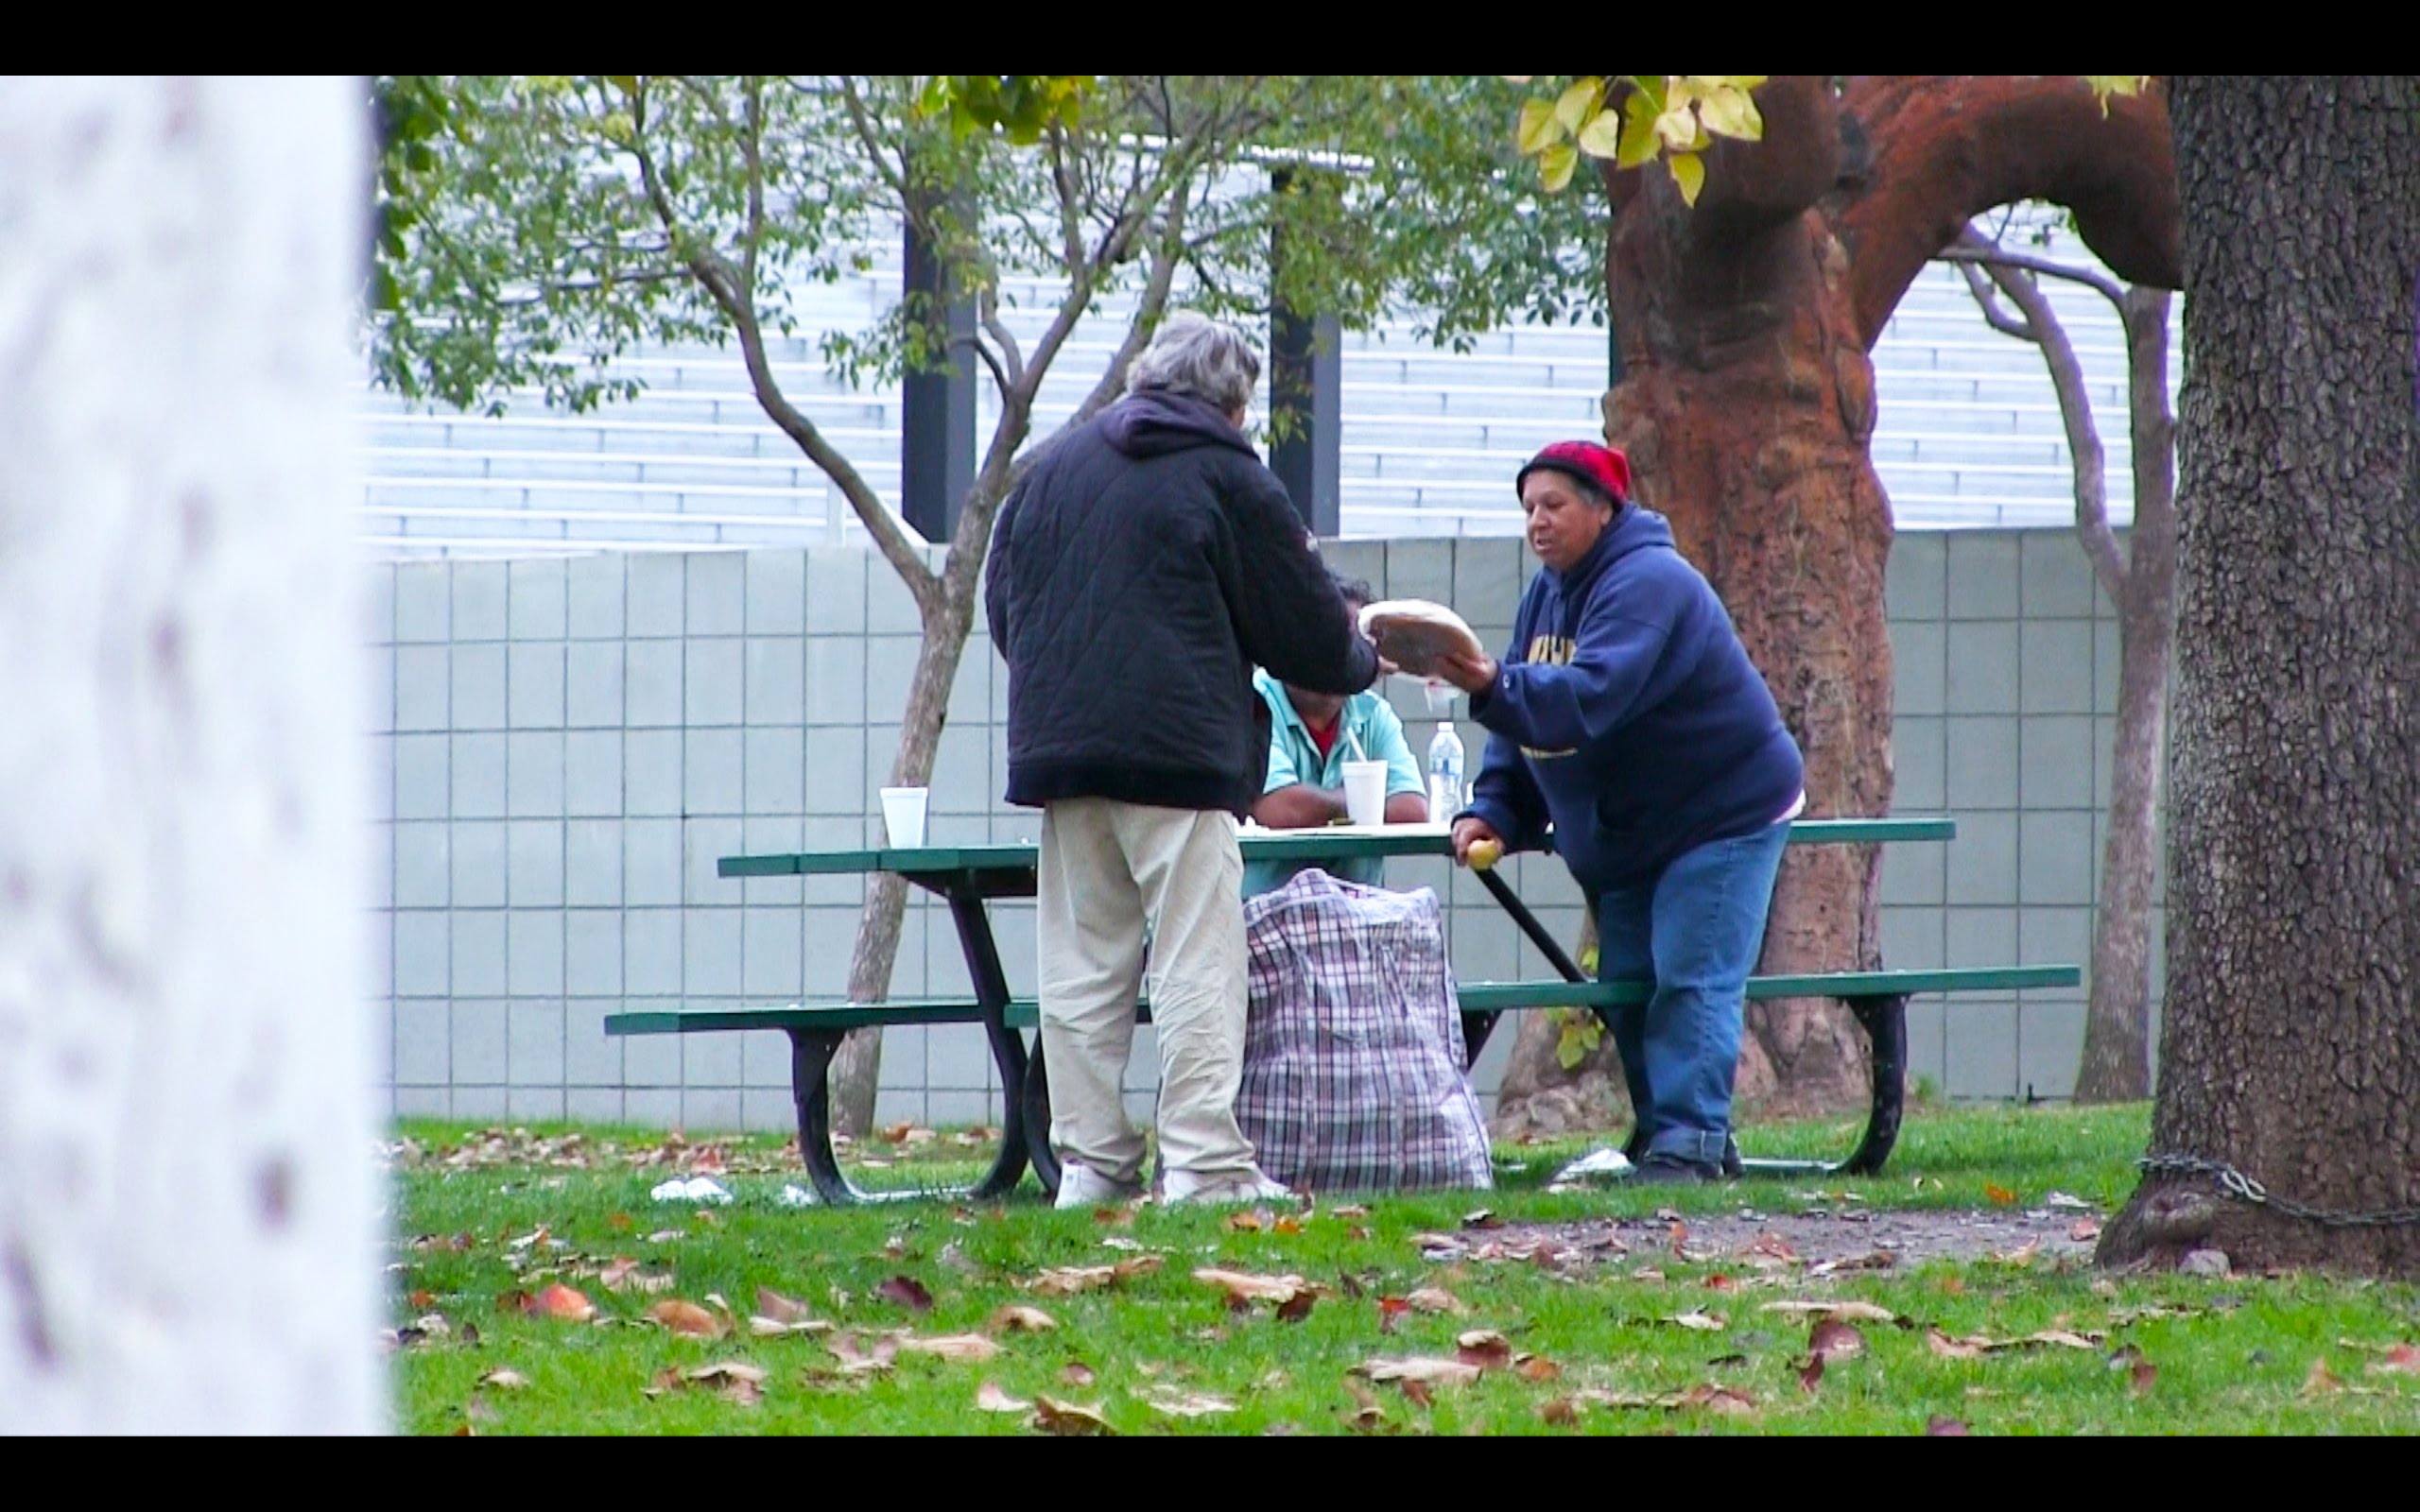 How Does A Homeless Man Spend $100? Watch This!